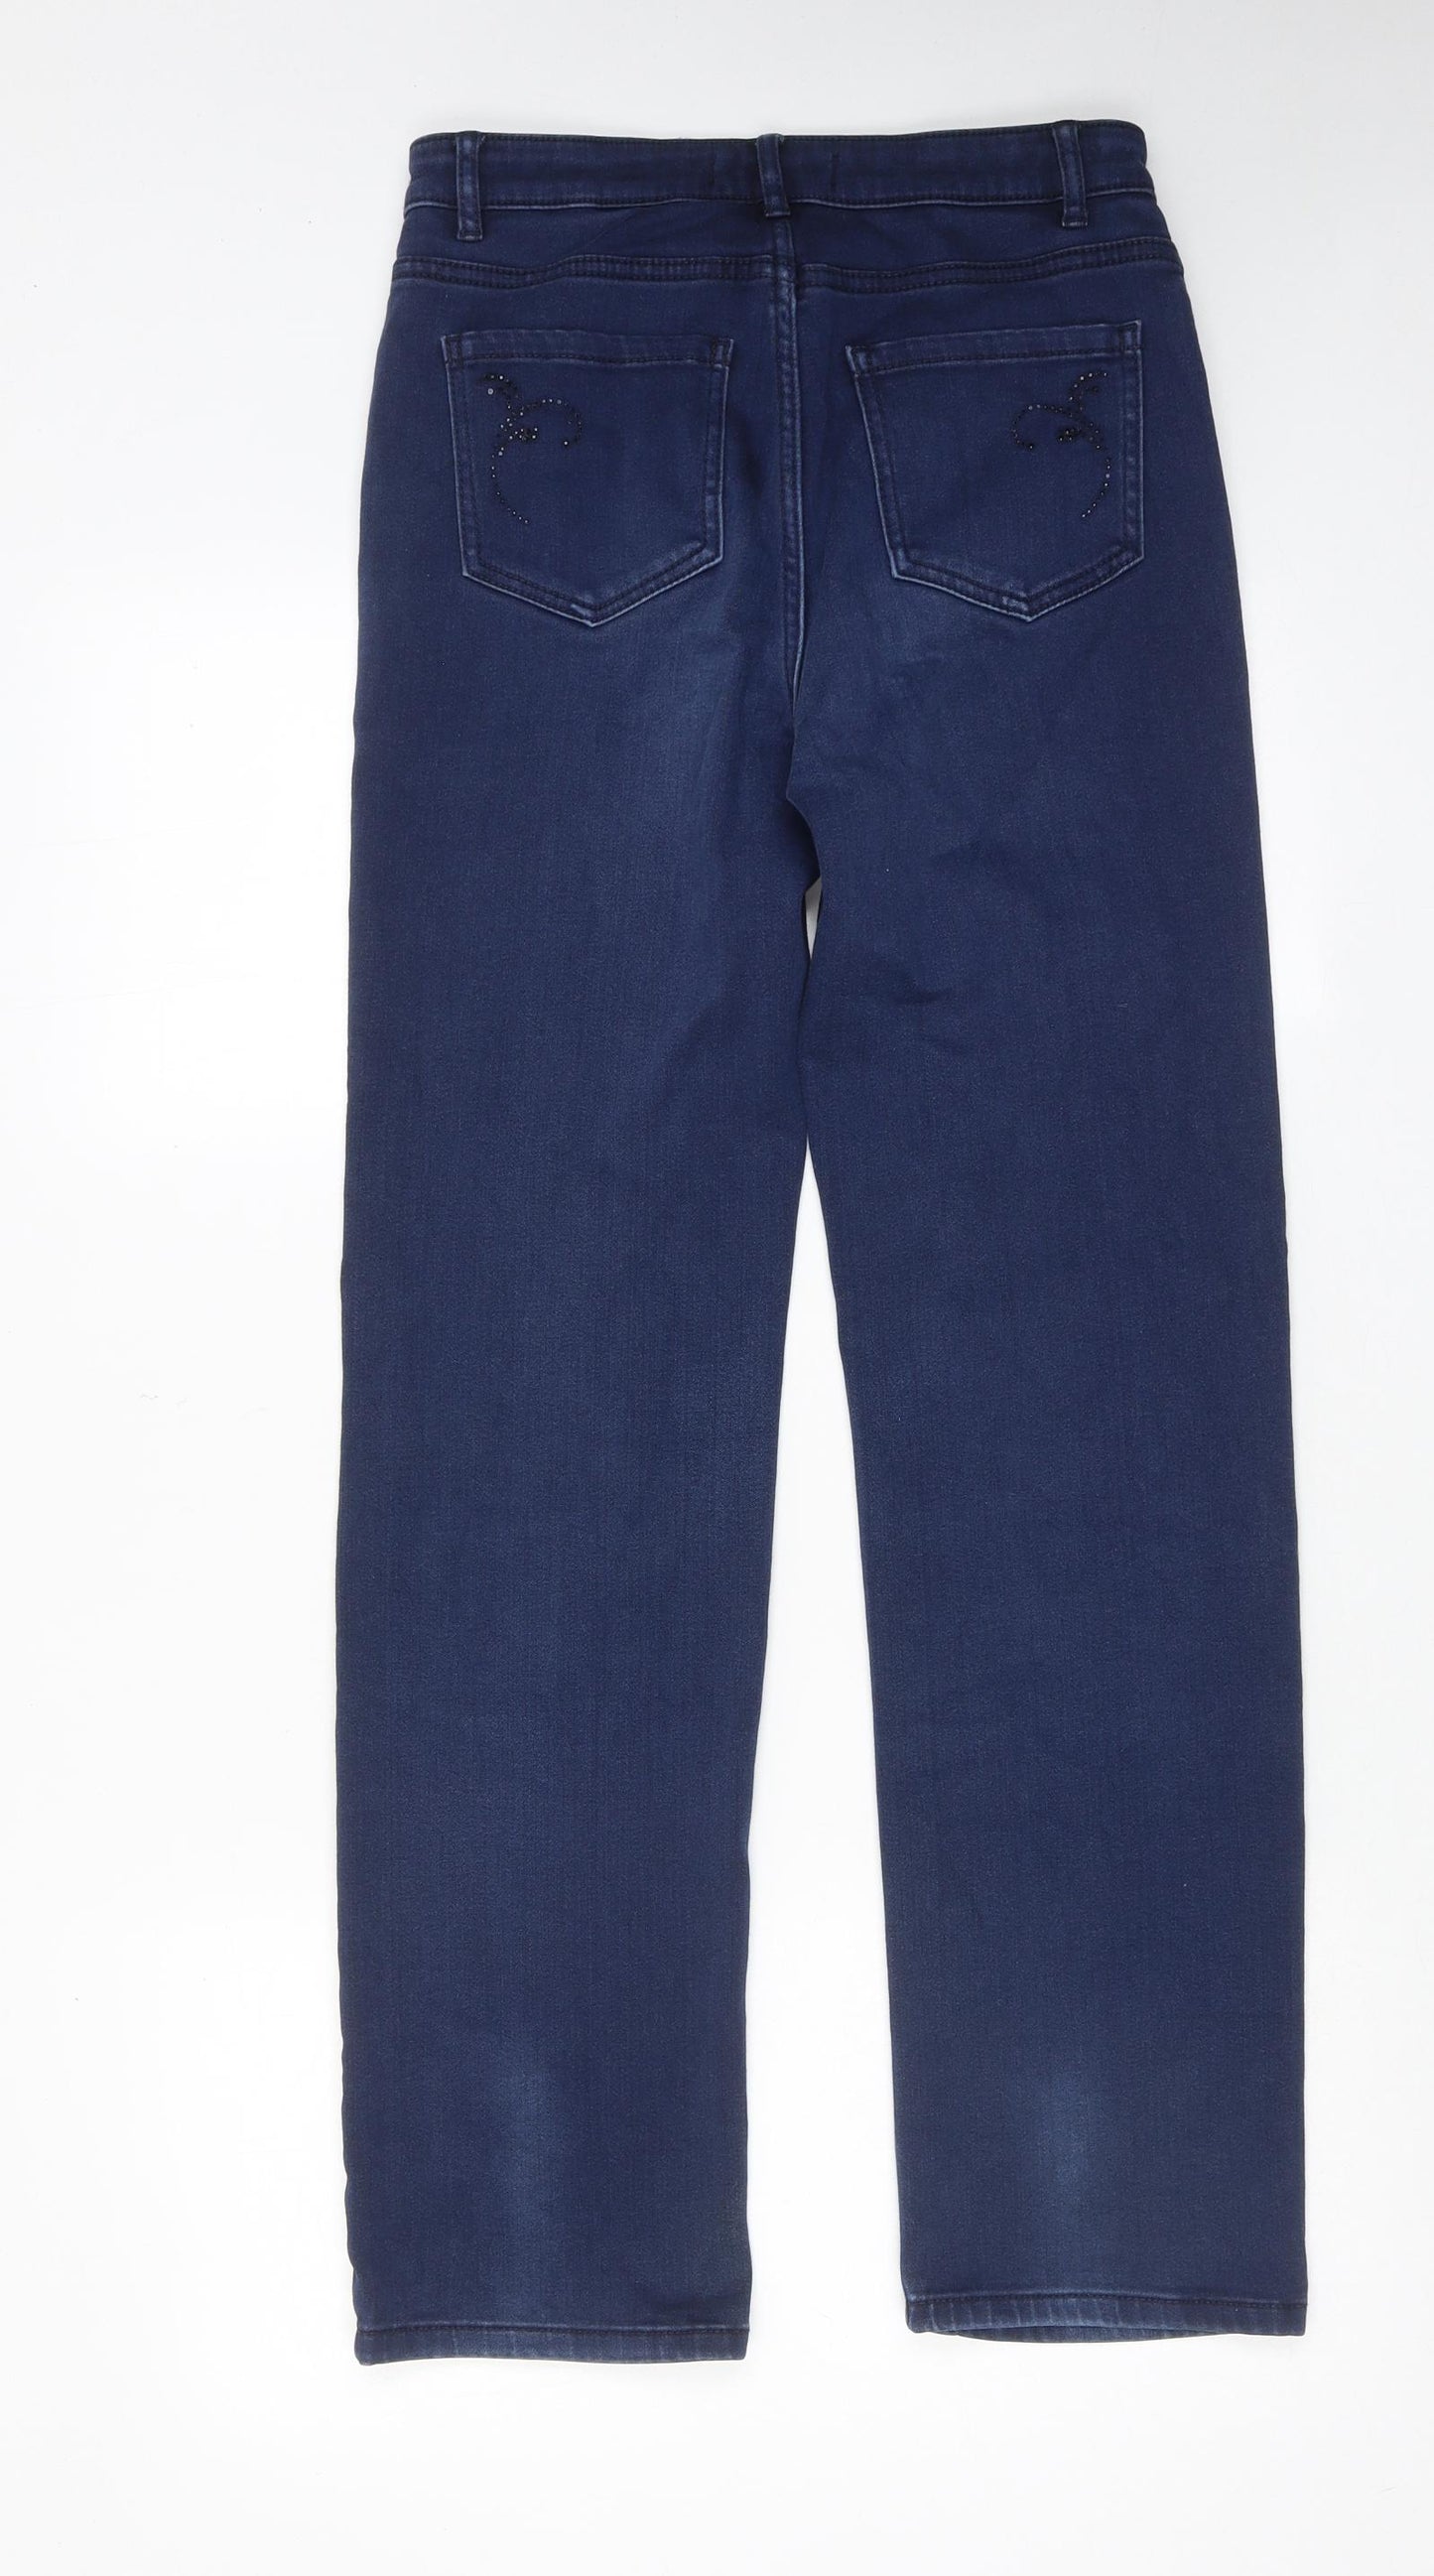 Marks and Spencer Womens Blue Cotton Straight Jeans Size 8 Regular Zip - Embellished Pockets